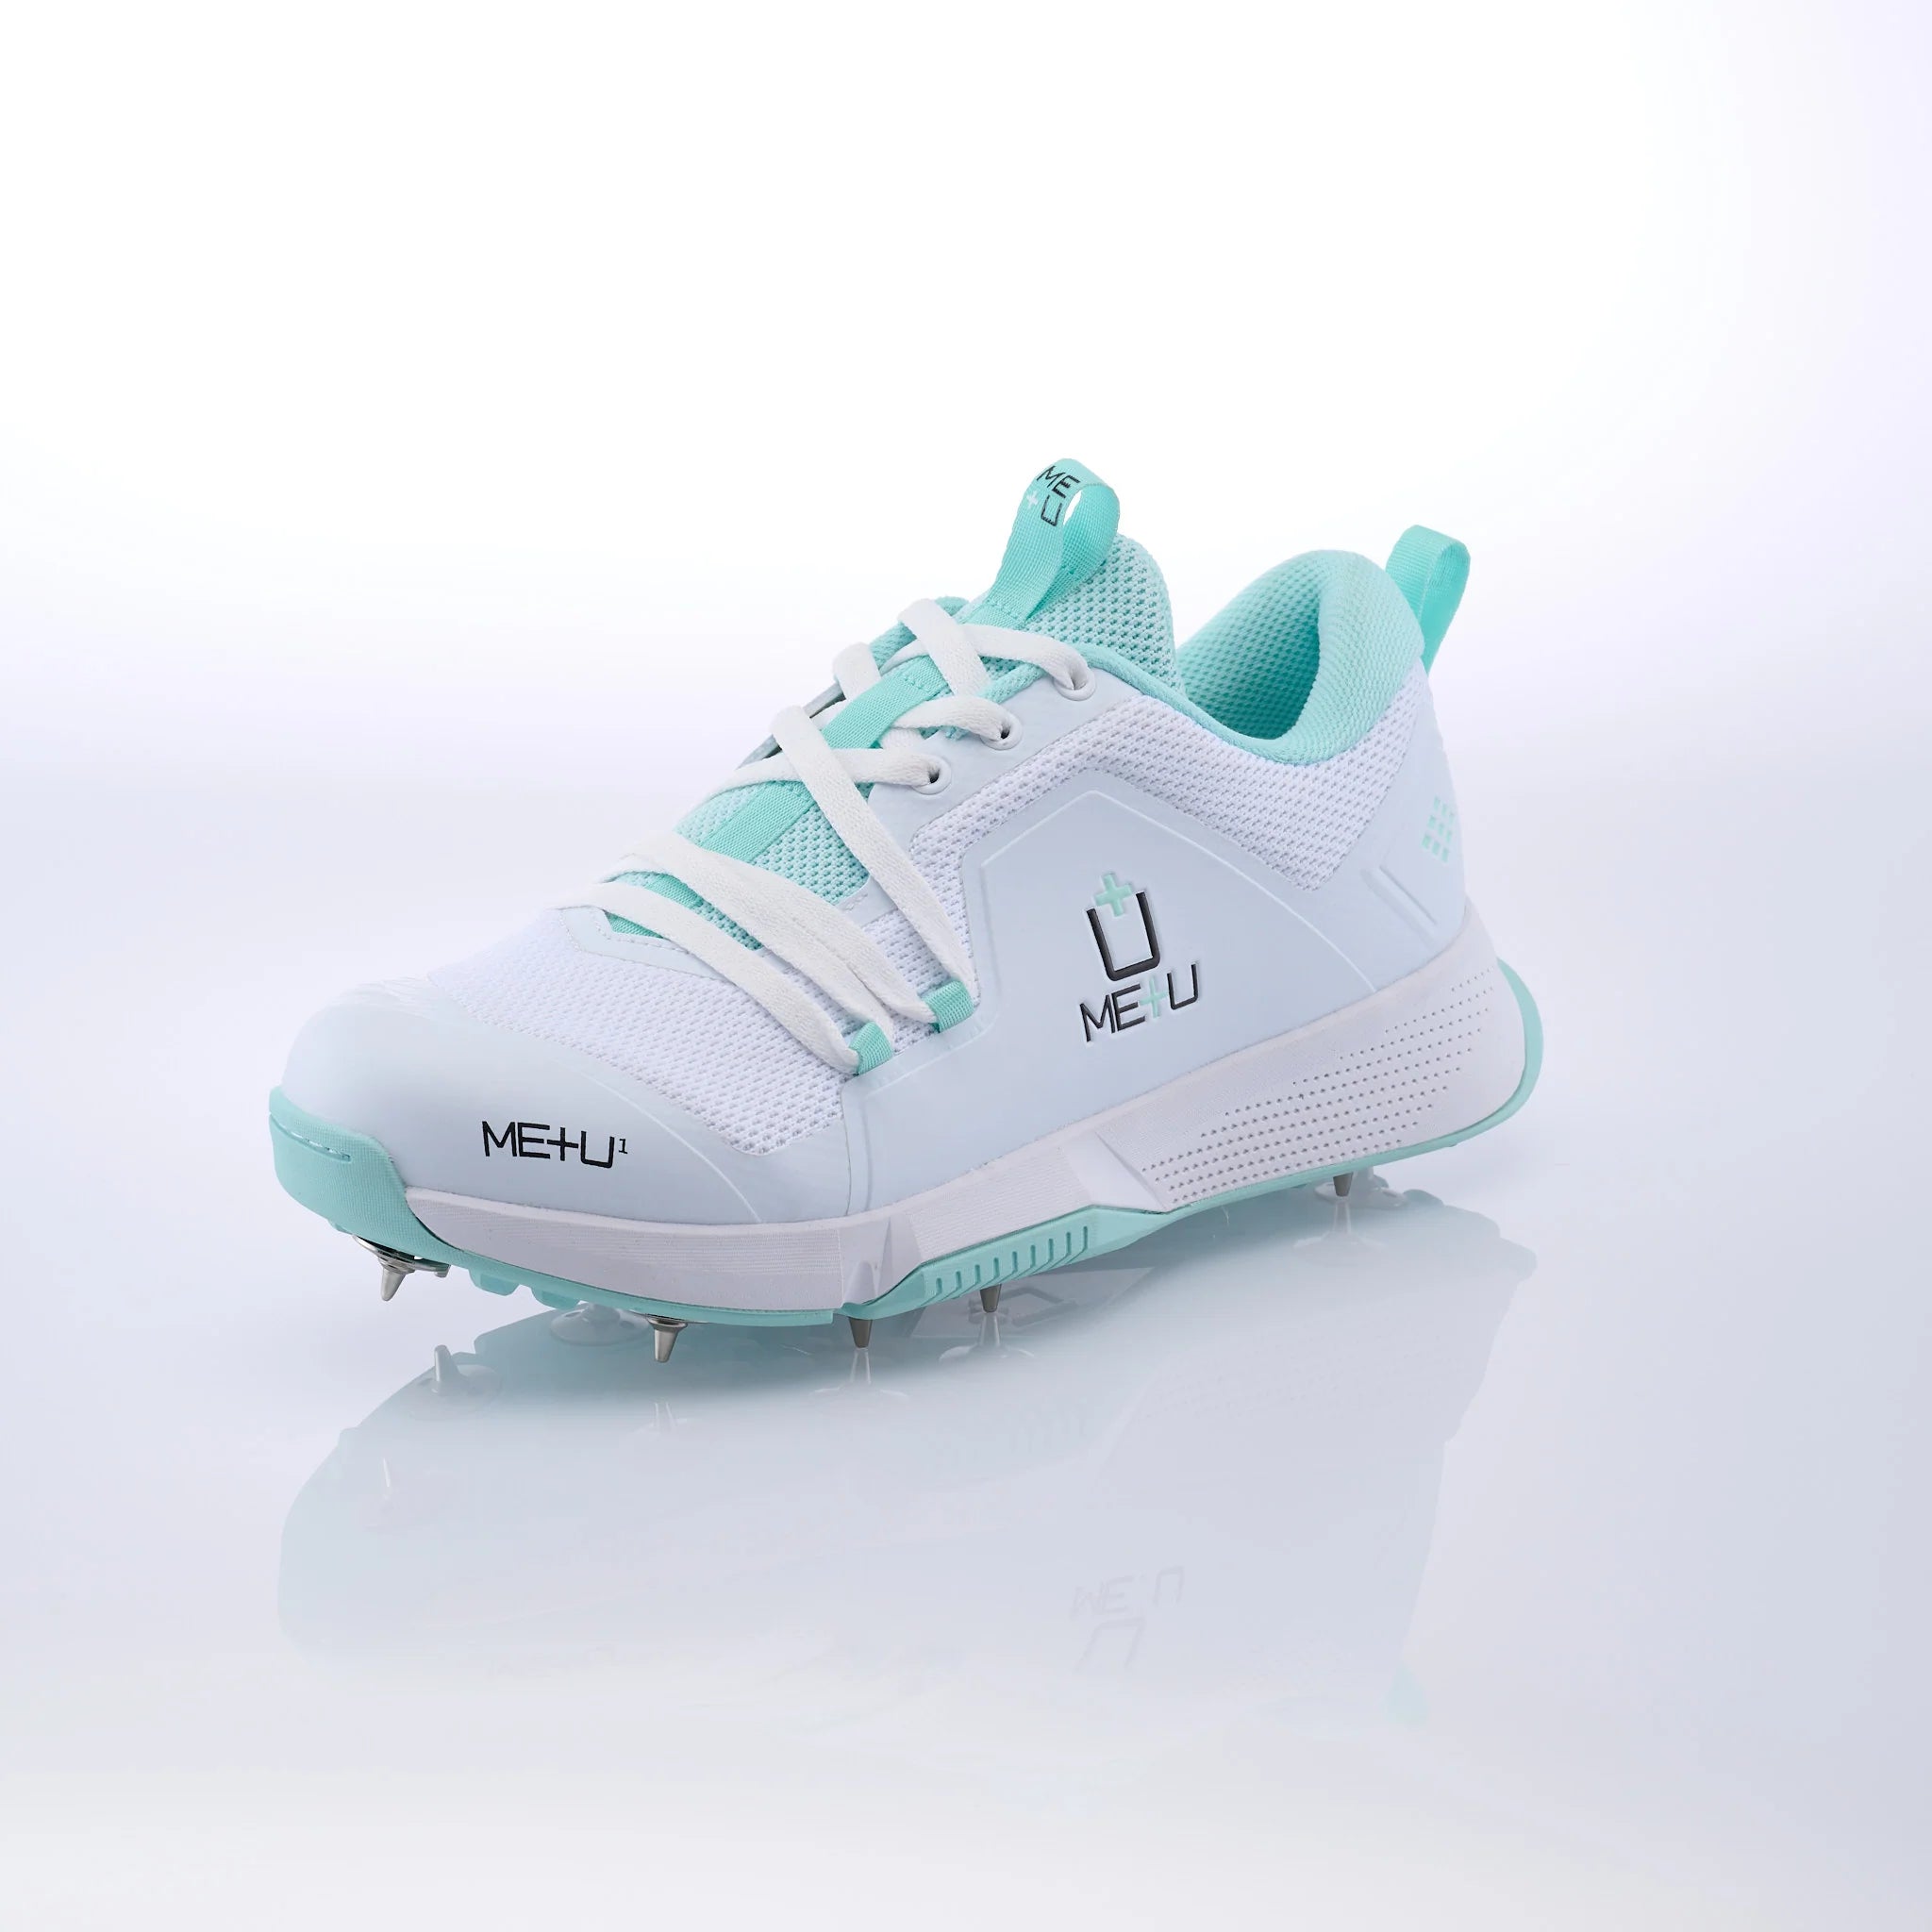 ME+U Womens All Rounder Cricket Spikes Shoe